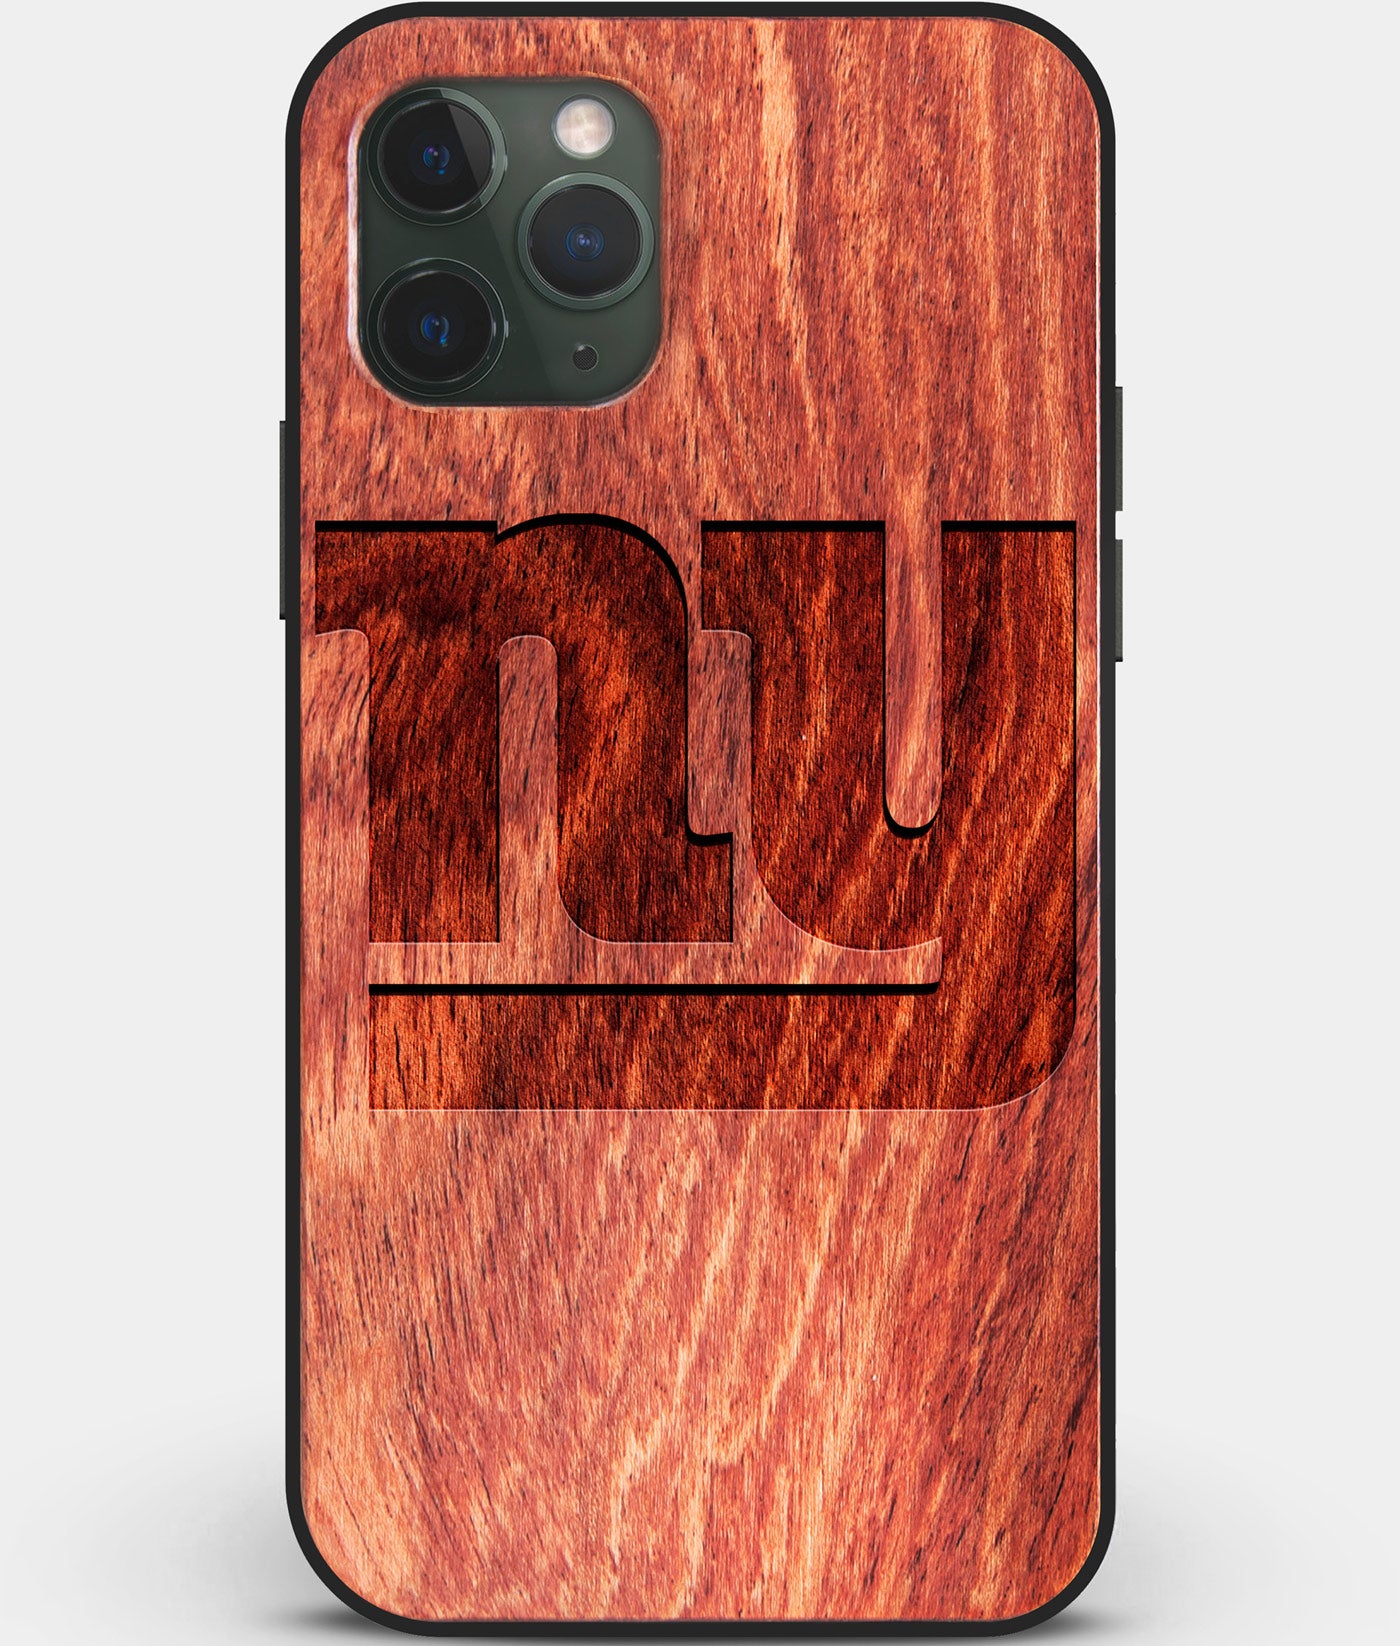 Custom Carved Wood New York Giants iPhone 11 Pro Max Case | Personalized Mahogany Wood New York Giants Cover, Birthday Gift, Gifts For Him, Monogrammed Gift For Fan | by Engraved In Nature